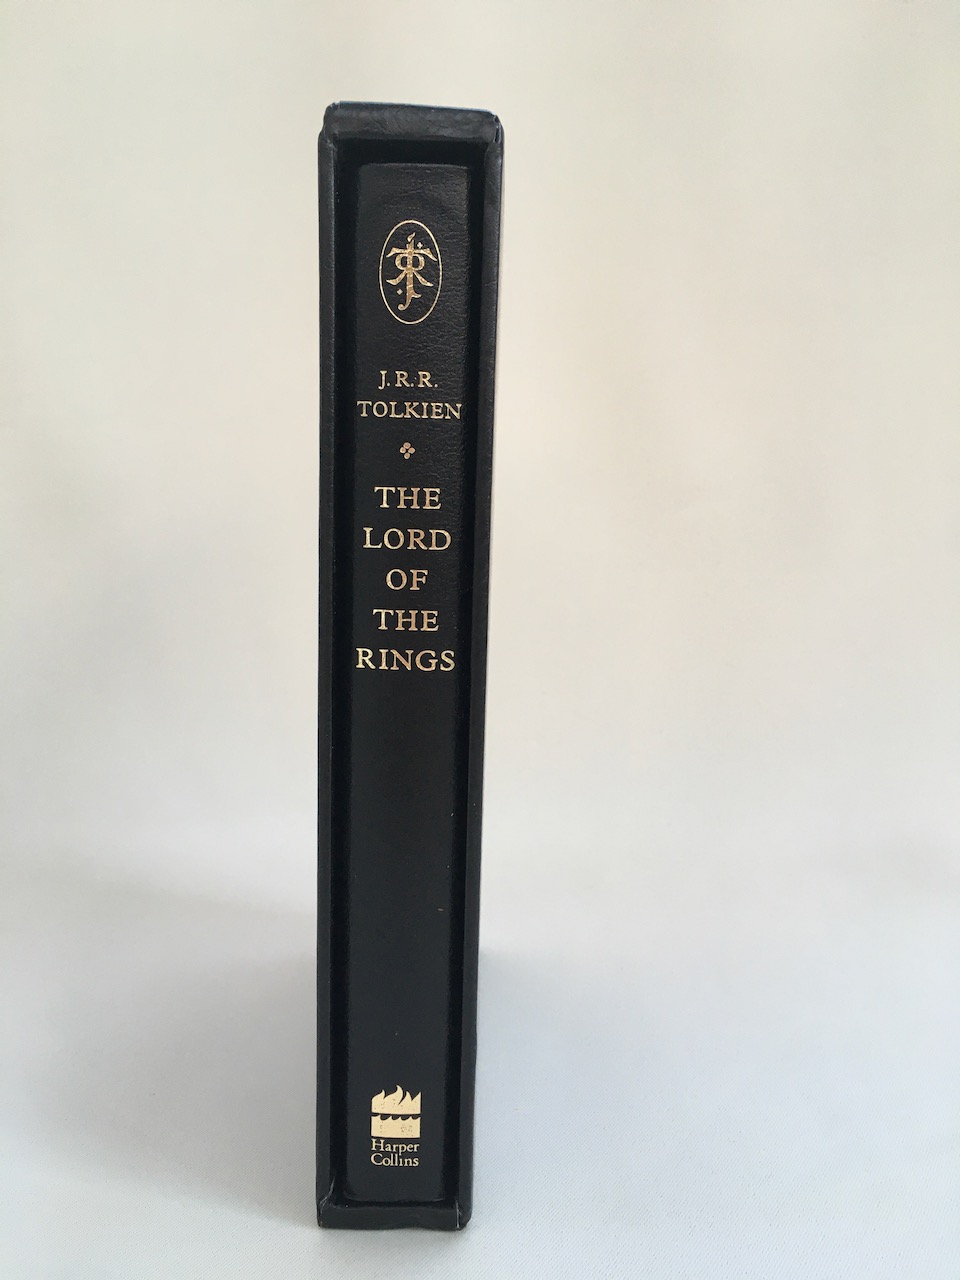 Lord of the Rings, Harper Collins Deluxe Limited Edition of 2001 - Black Leather 1